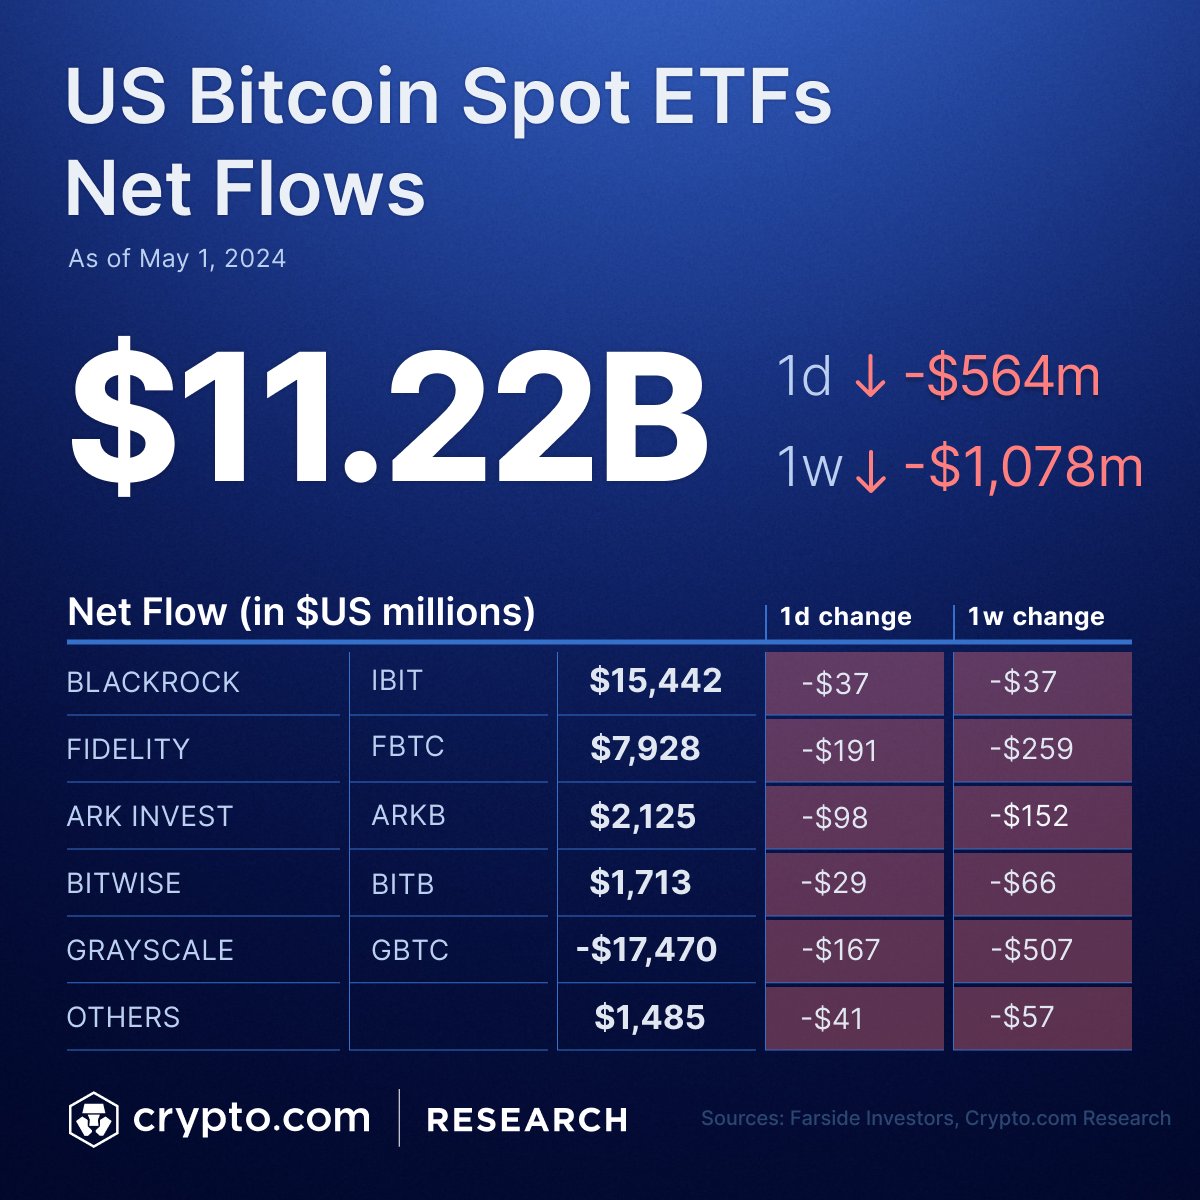 💸 Latest data shows US Spot #Bitcoin ETFs with a total net inflow of $11.22B. On 1 May, the ETFs saw its largest daily net outflow of $564M since launch. Blackrock’s IBIT also saw its first day of net outflow.